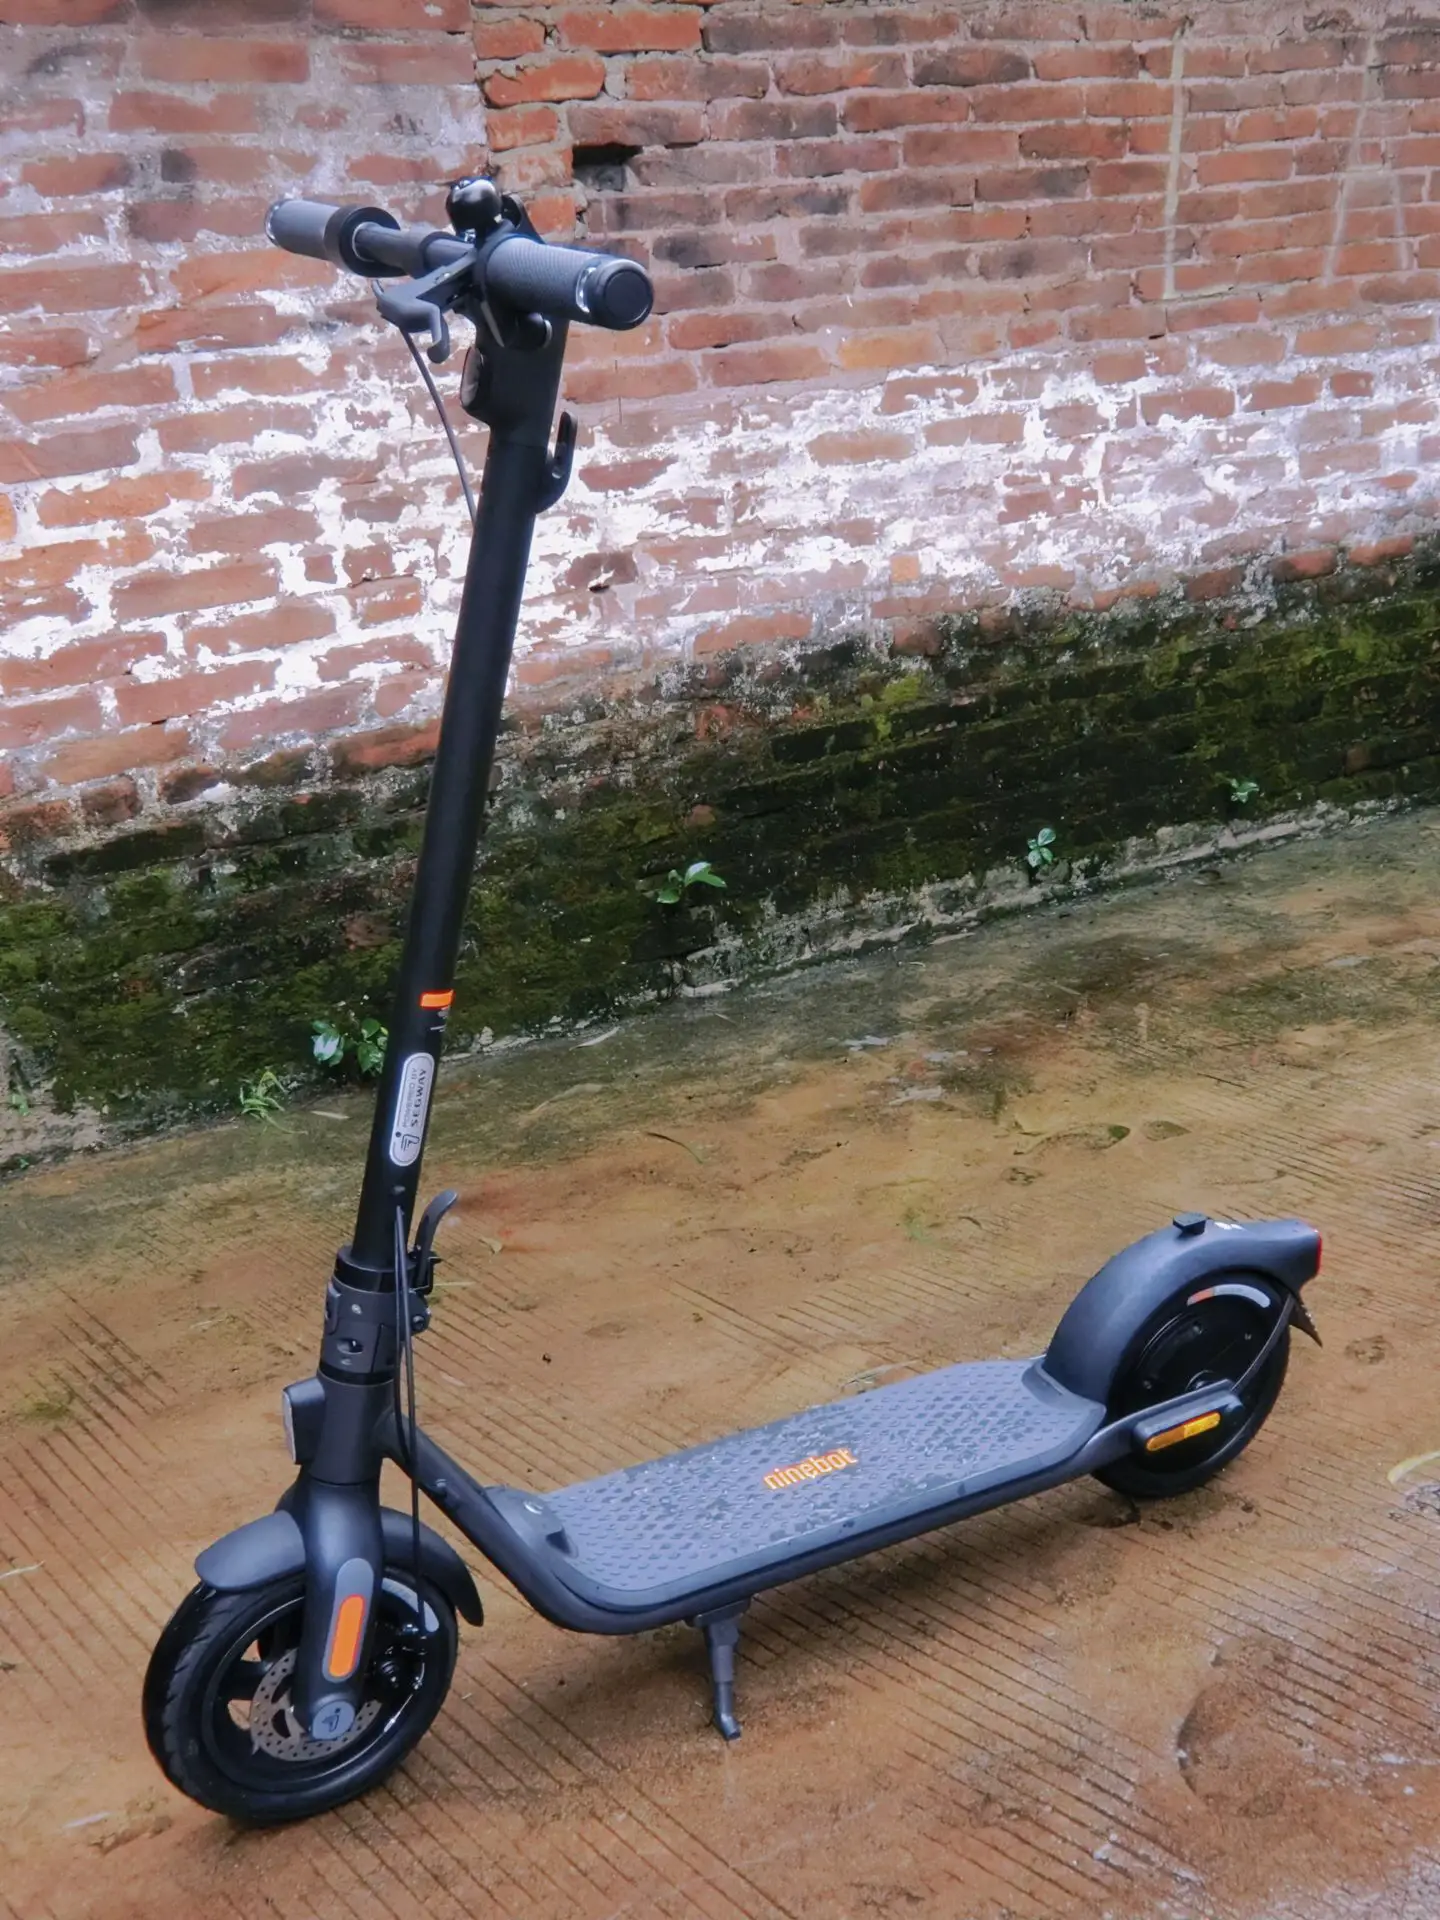 Amway Electric Scooter Review - Lemon8 Search